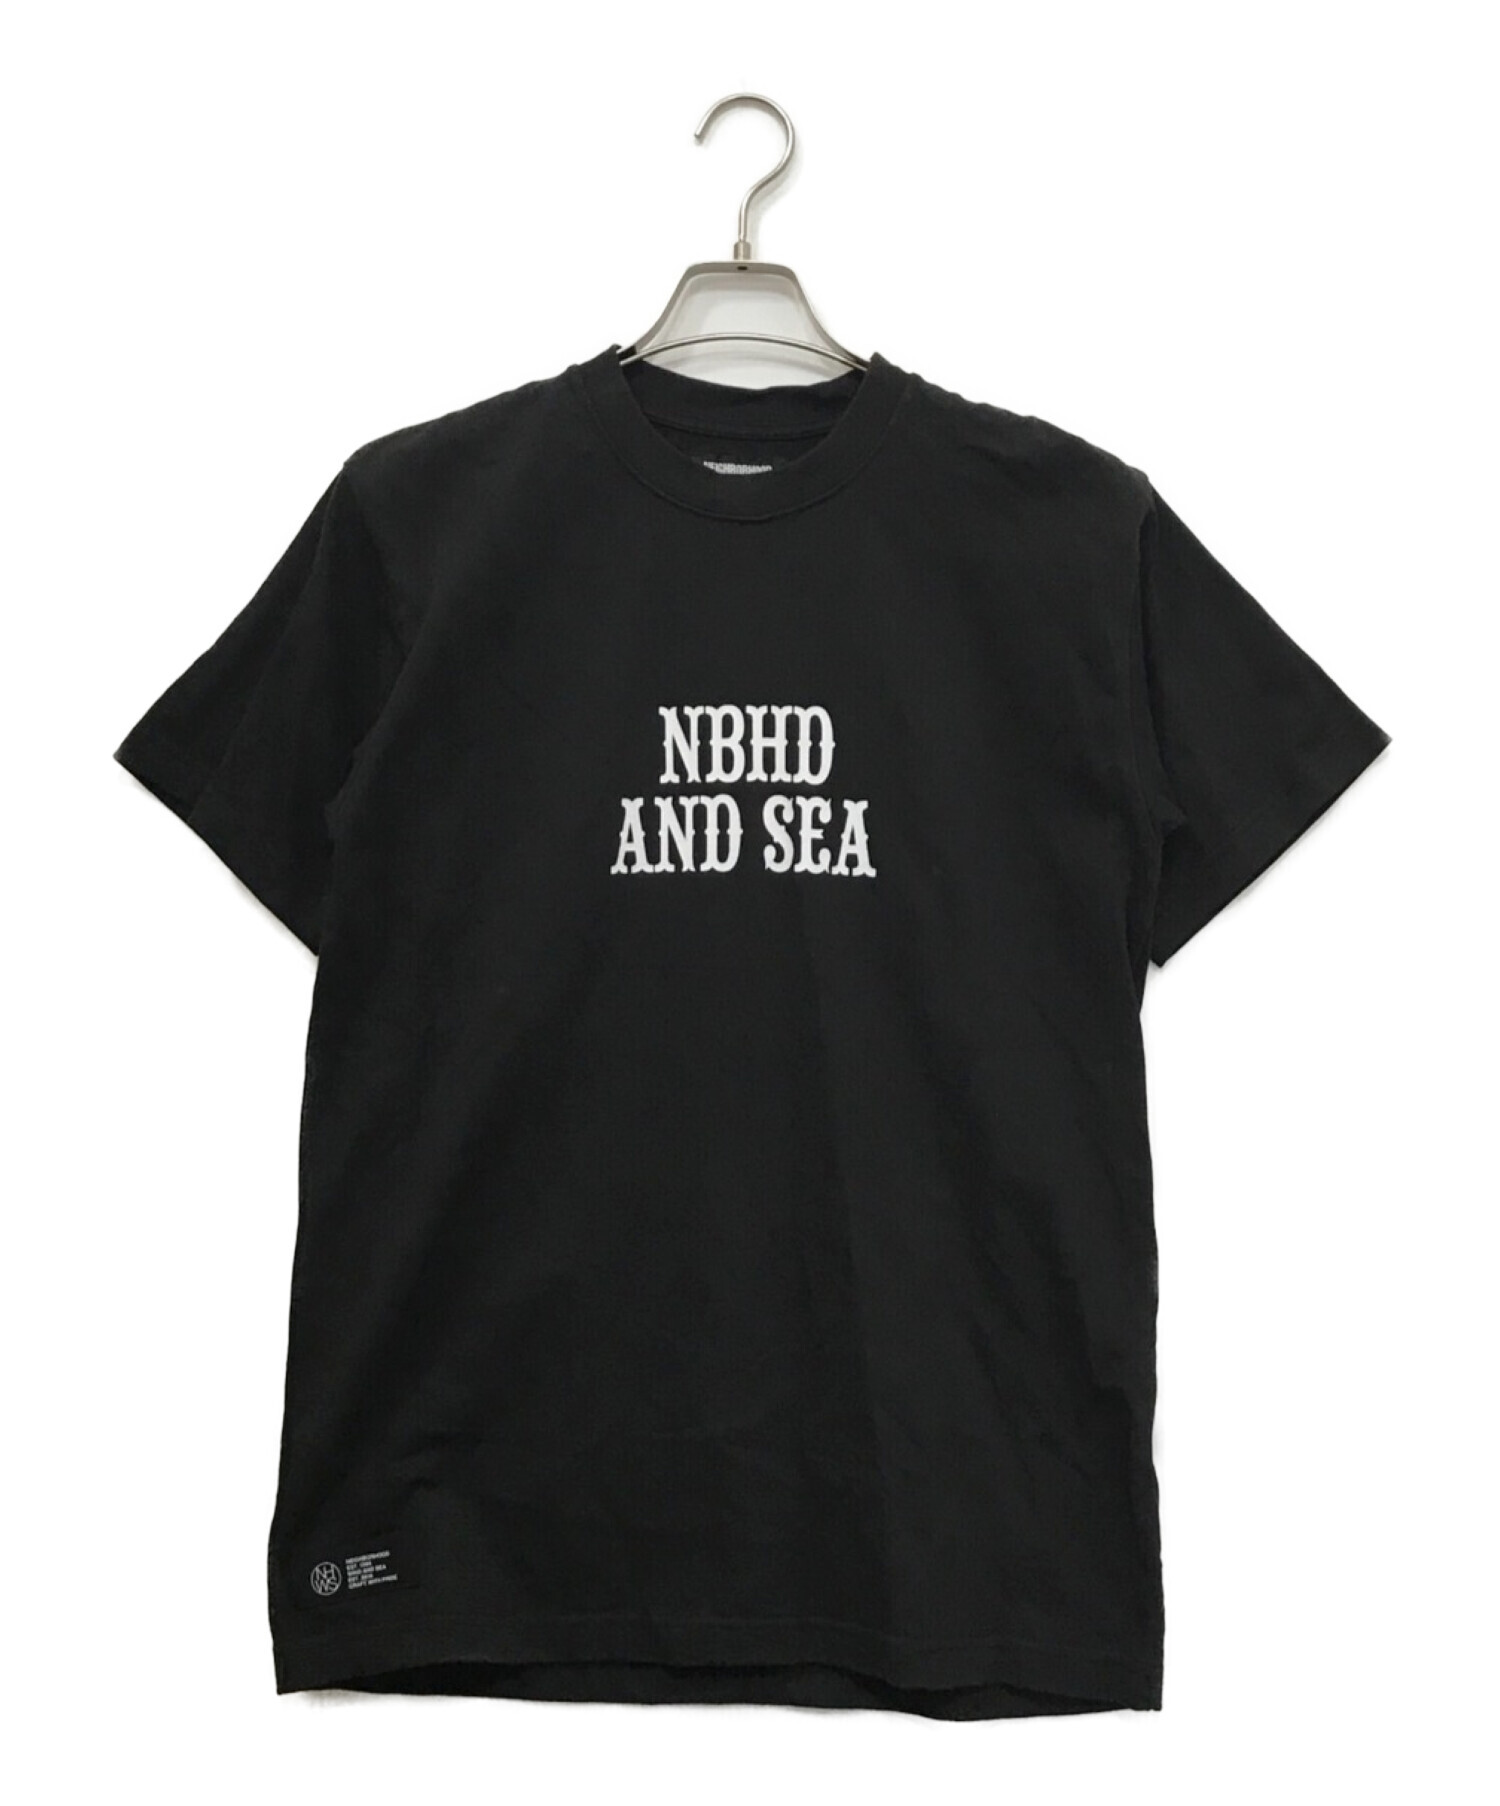 WIND AND SEA S/S T-SHIRTトップス